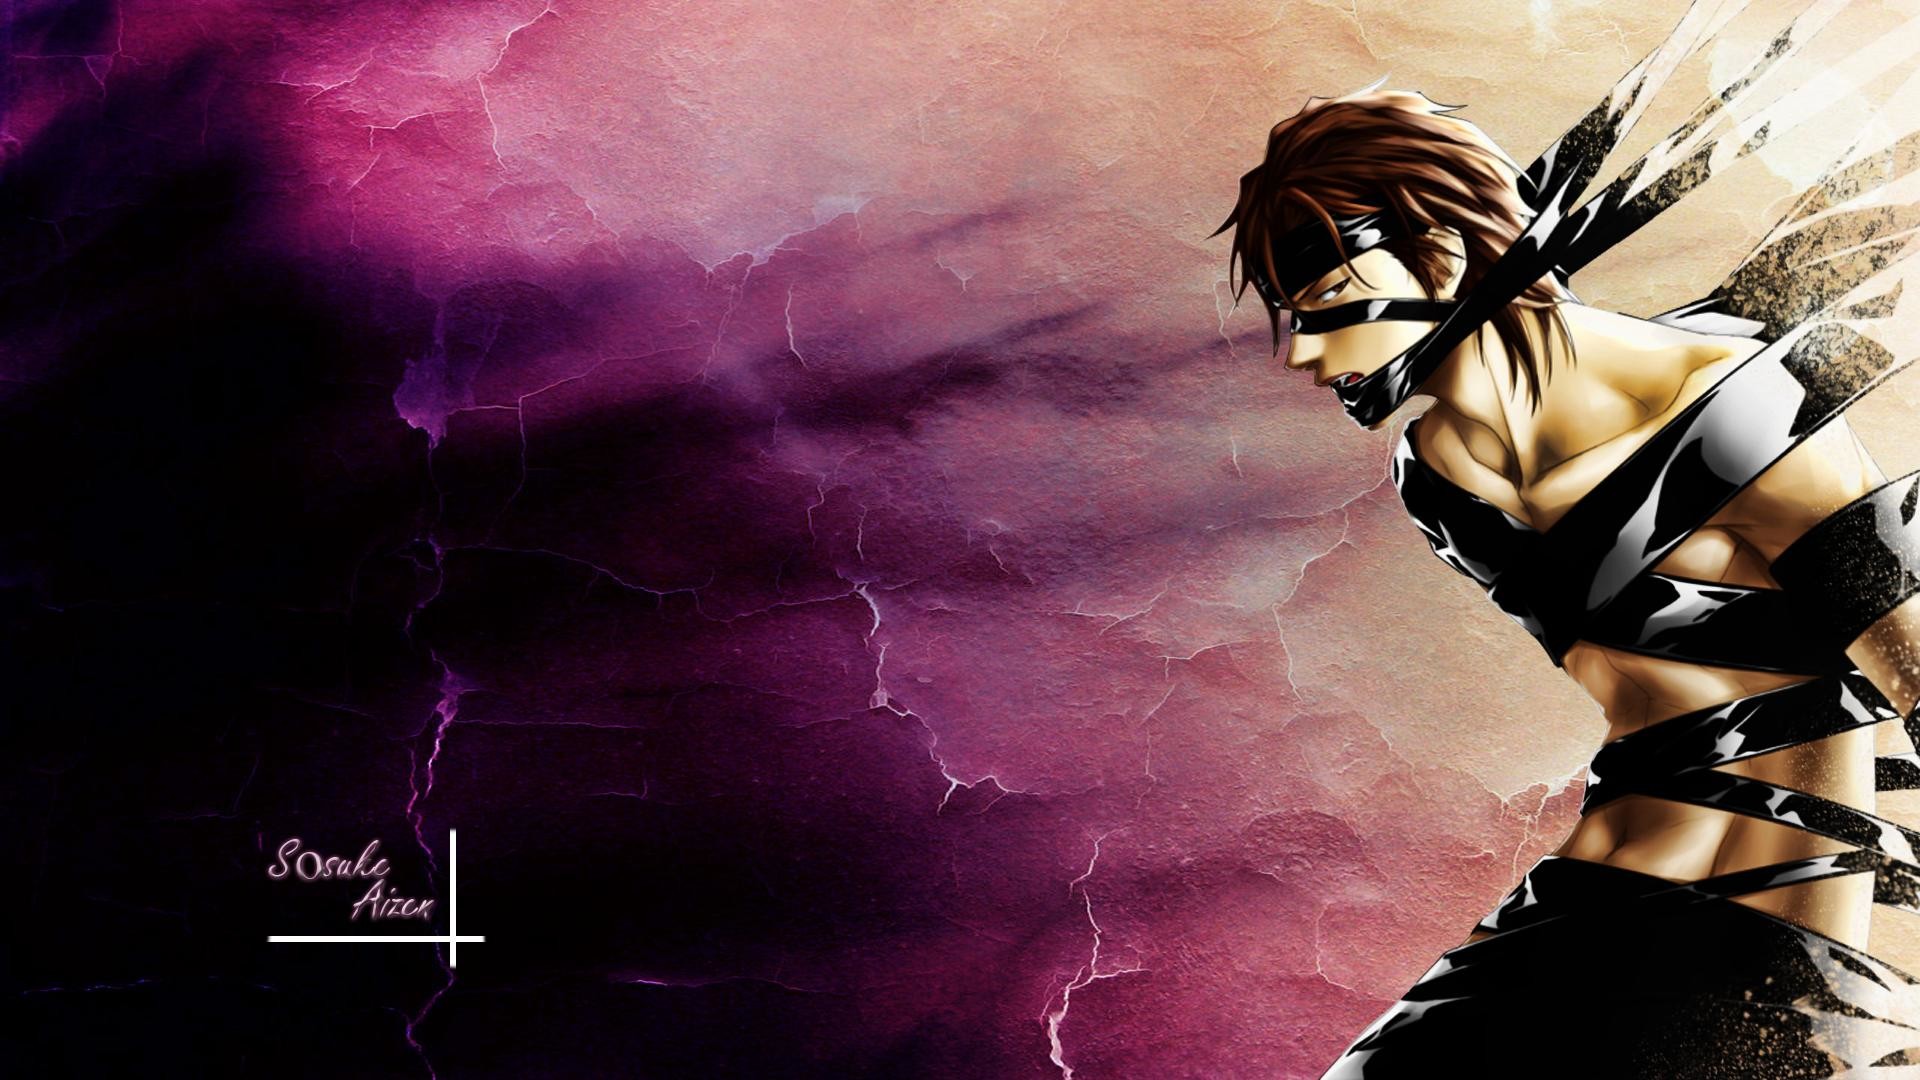 Sousuke Aizen Wallpapers by Jamie Grant #4